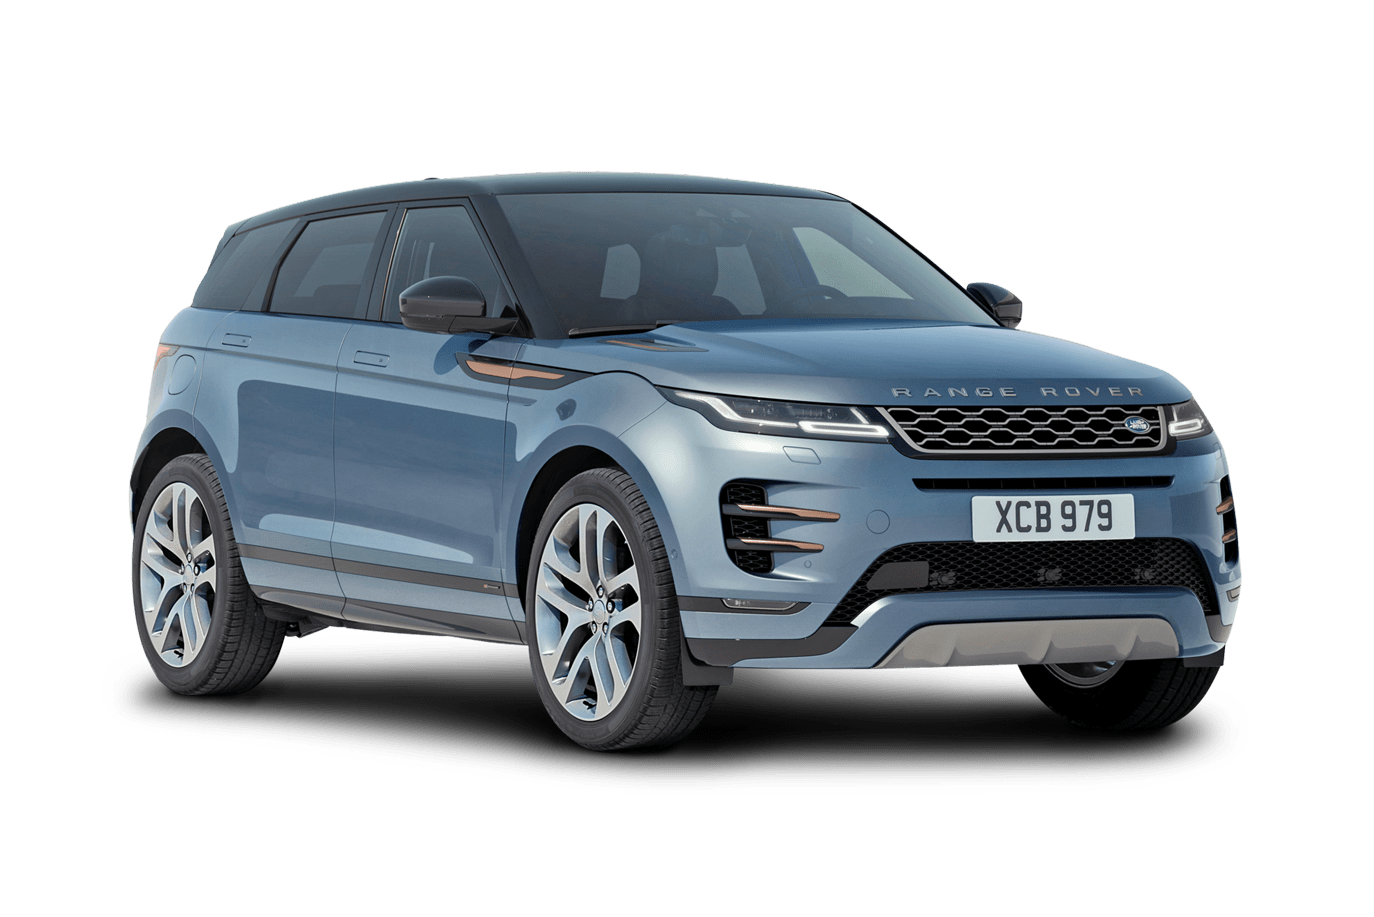 Range Rover Review, For Sale, Interior, Models & Specs | CarsGuide